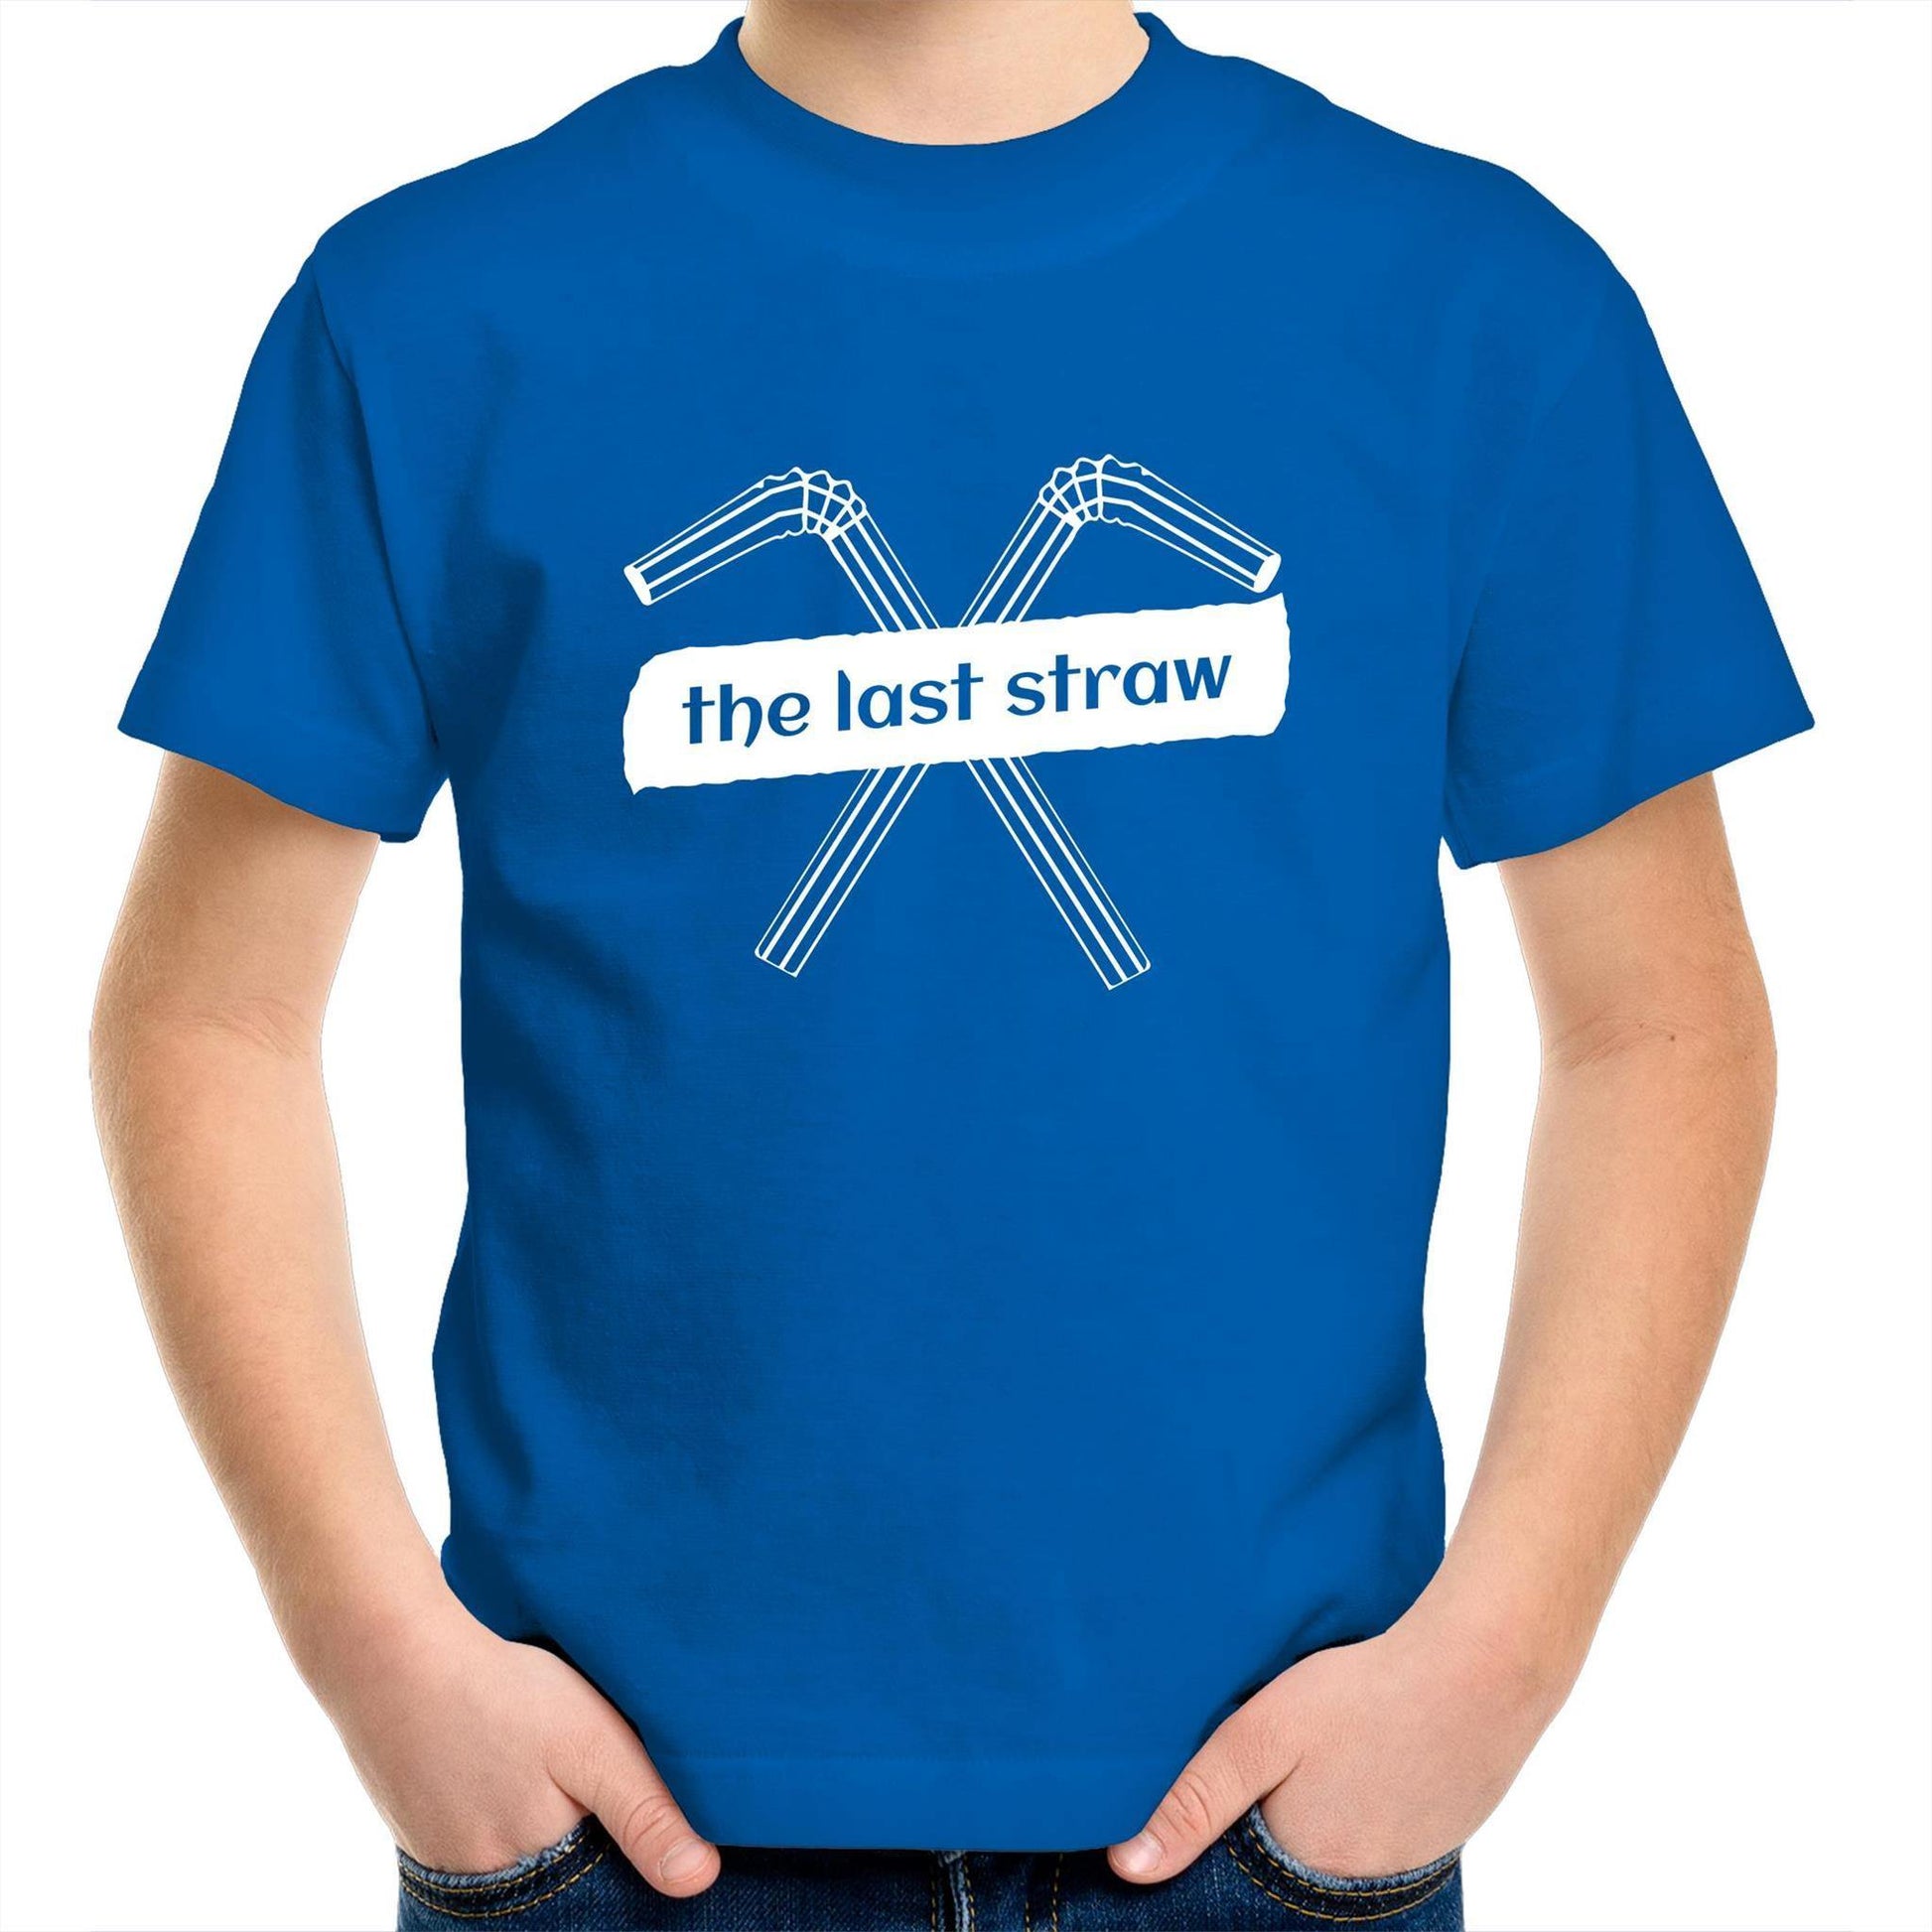 The Last Straw - Kids Youth Crew T-Shirt Bright Royal Kids Youth T-shirt Environment